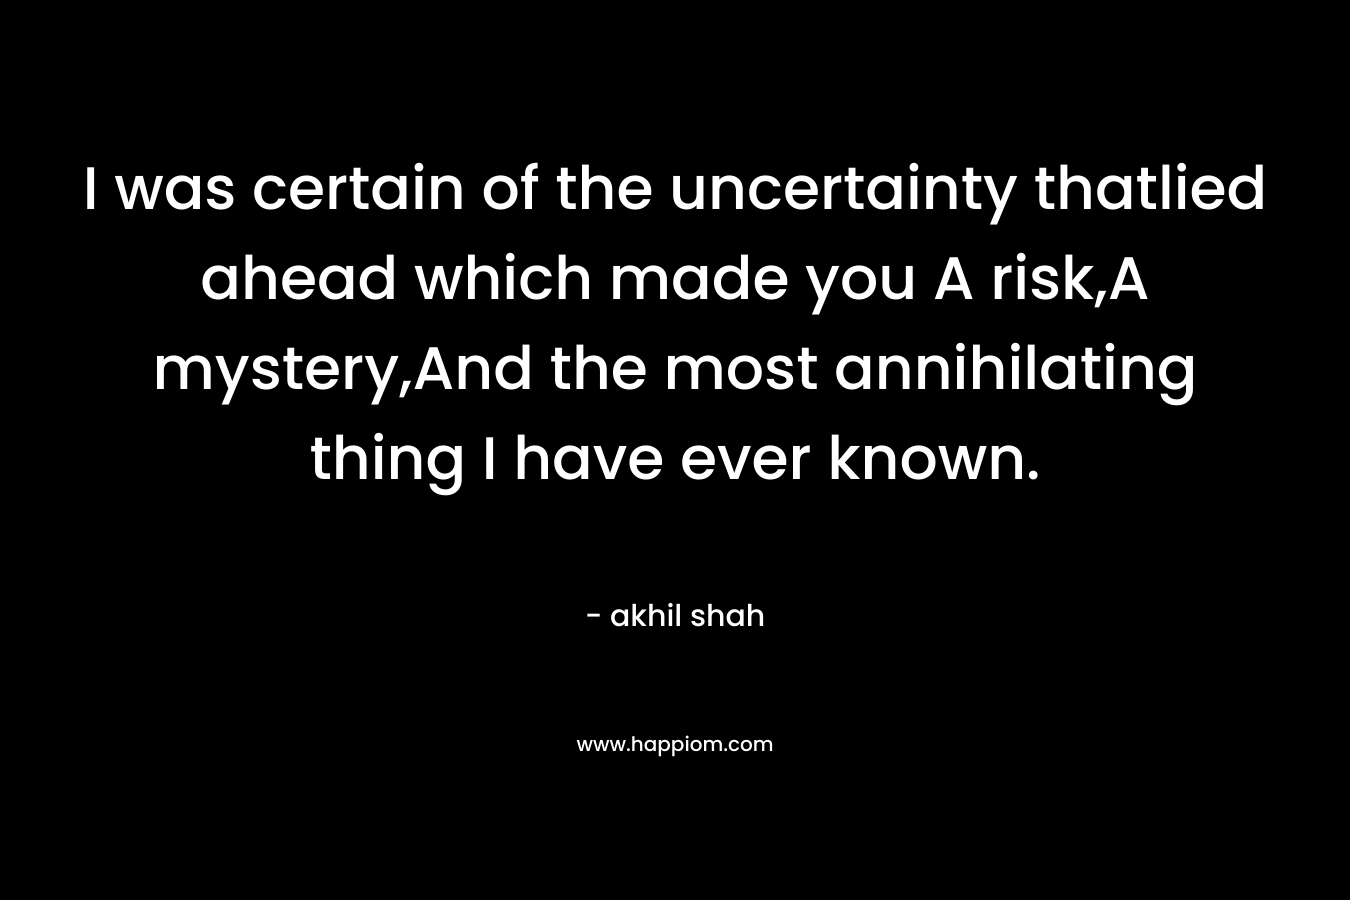 I was certain of the uncertainty thatlied ahead which made you A risk,A mystery,And the most annihilating thing I have ever known. – akhil shah